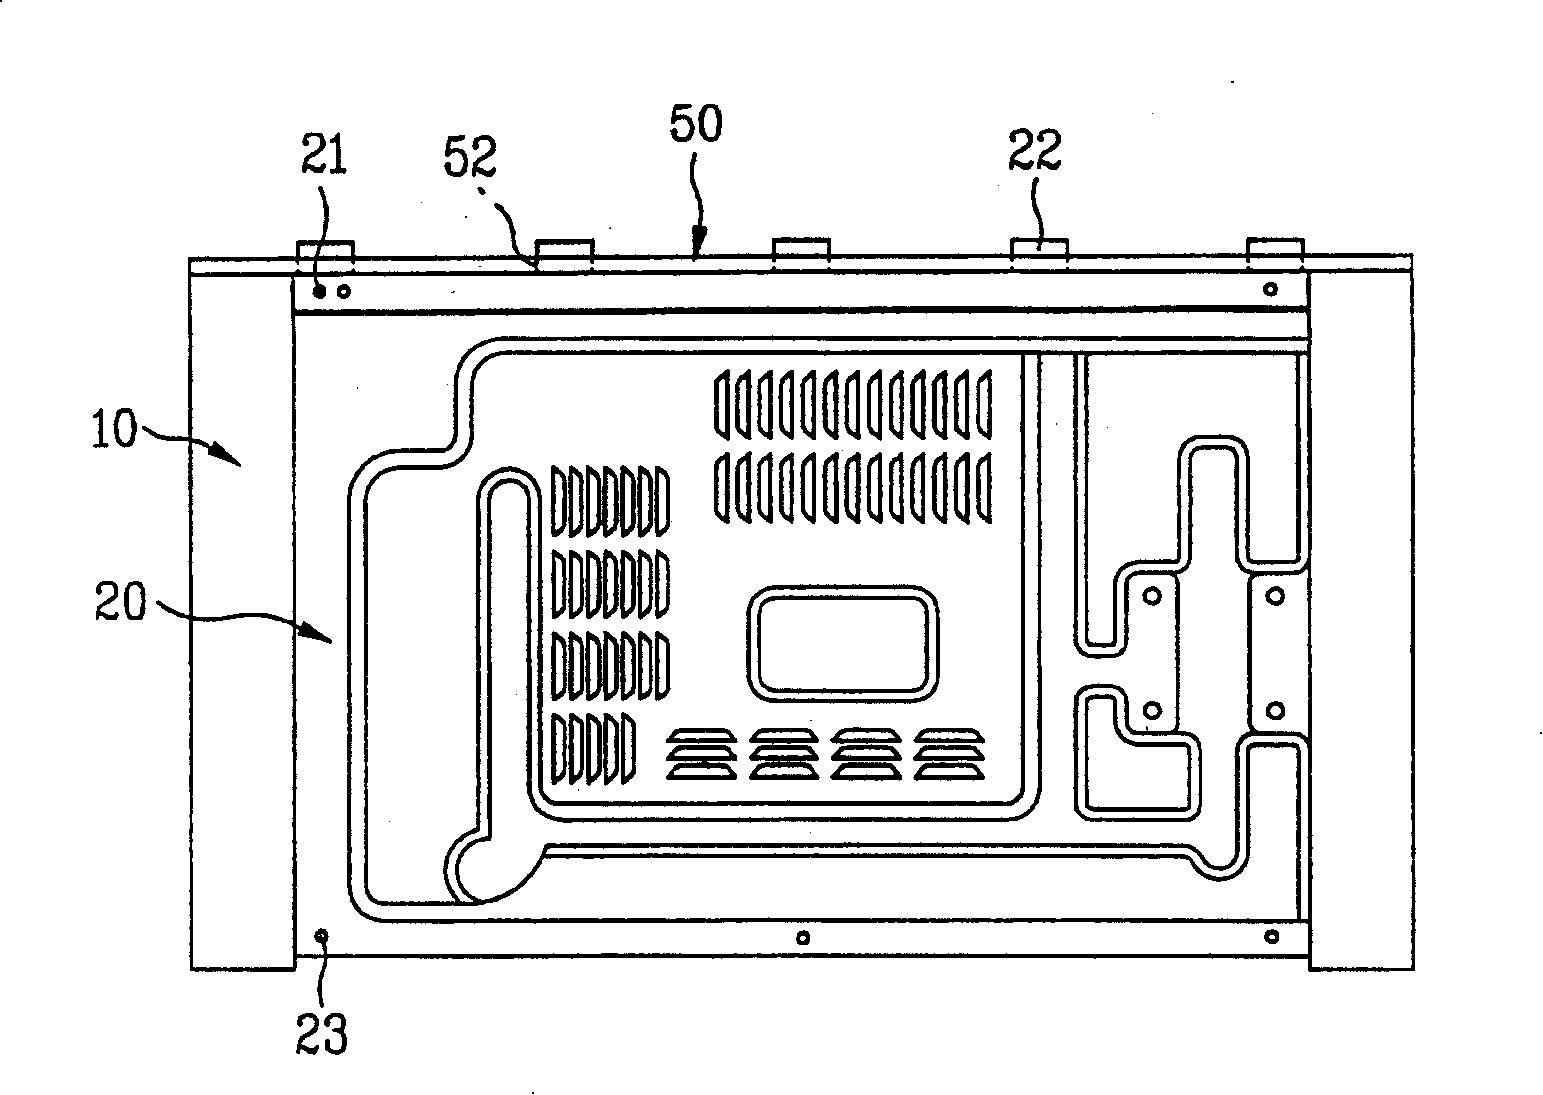 Assembling structure of microwave oven